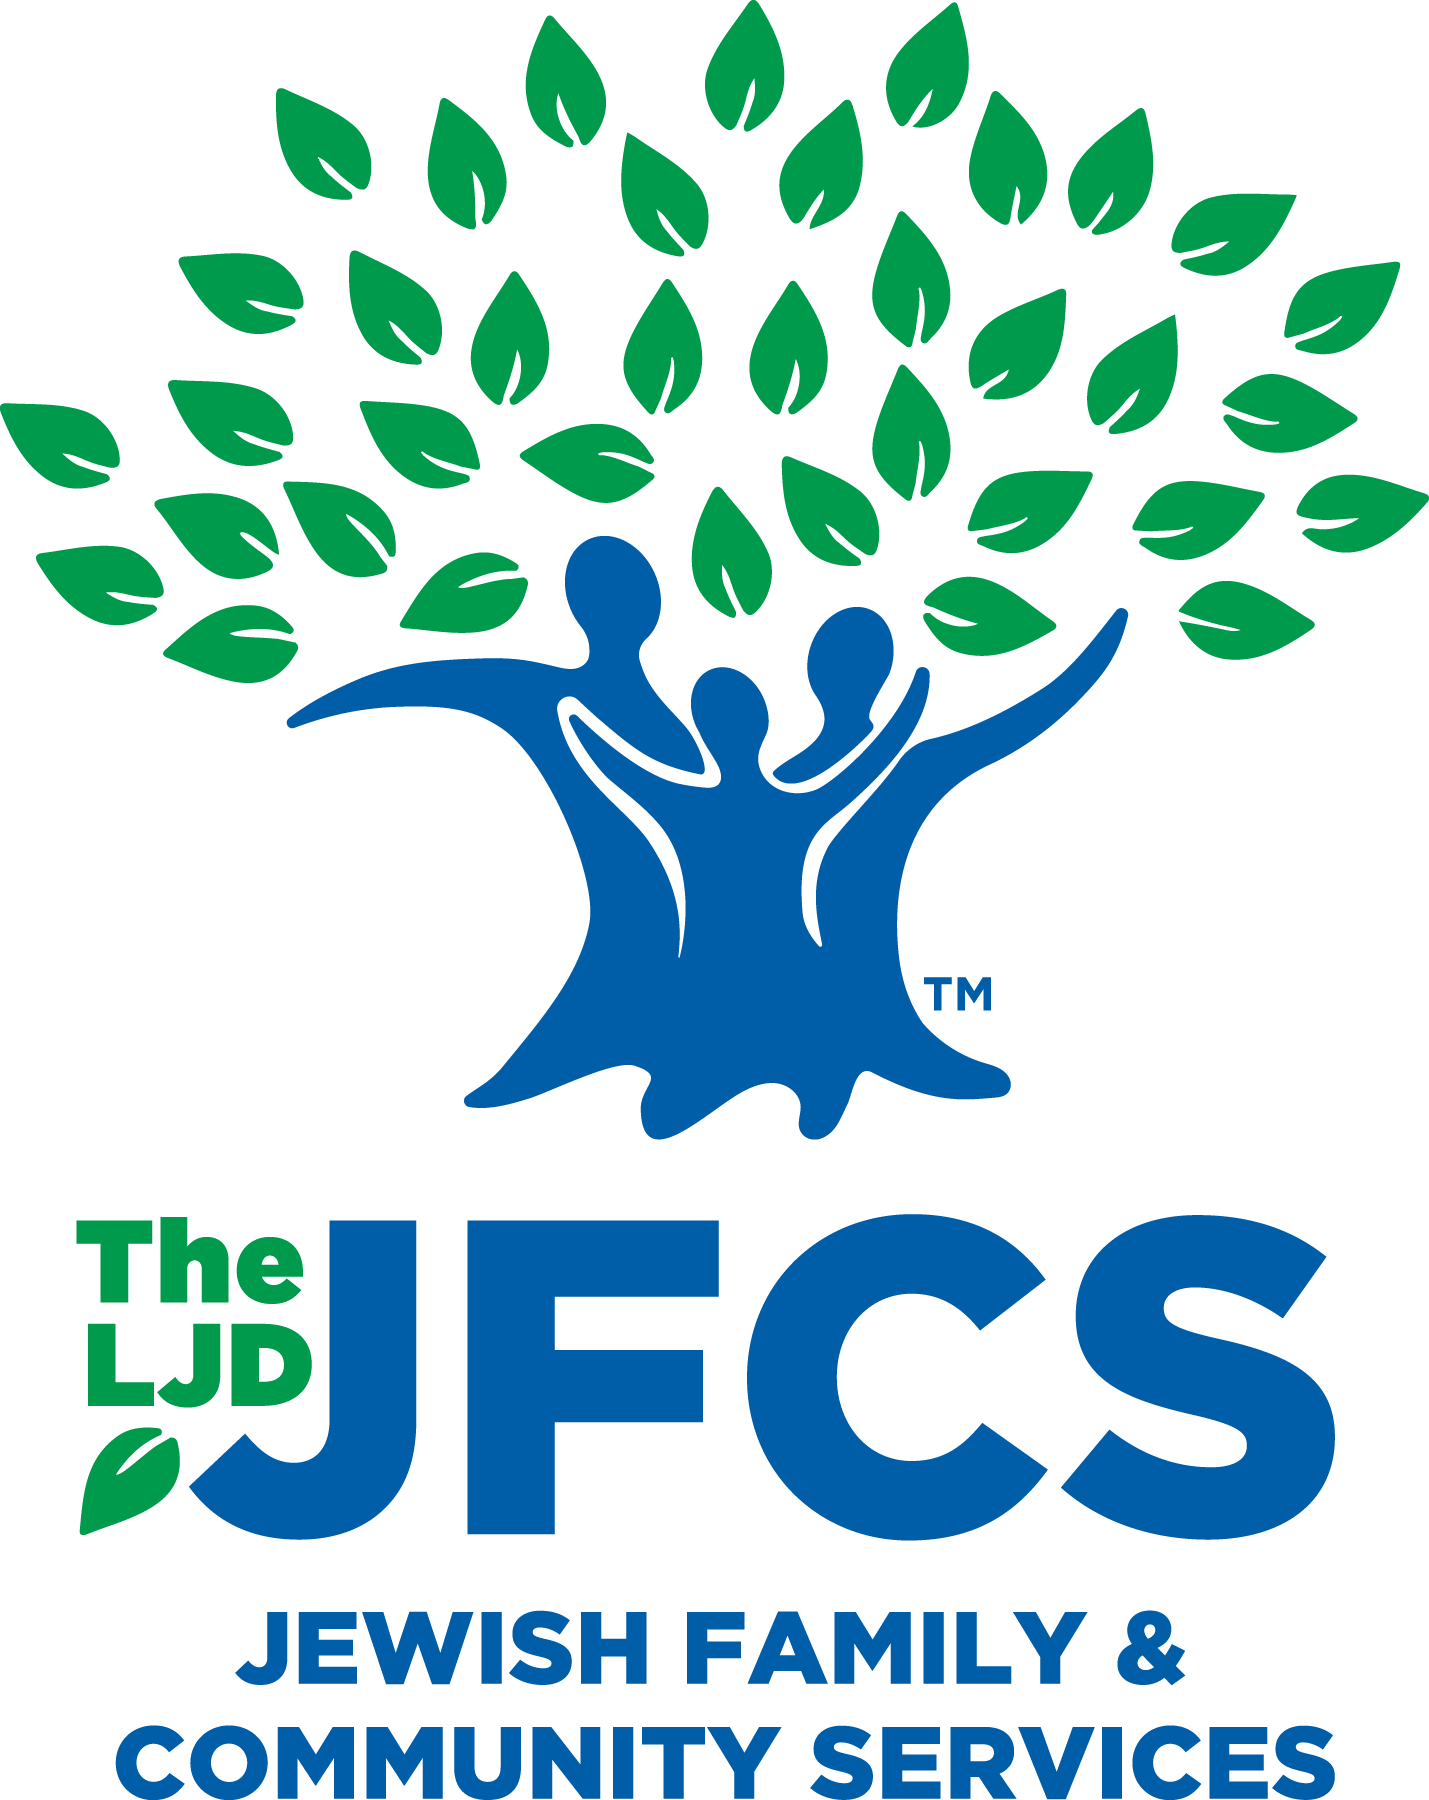 A stylized image of a tree where people are the trunk and the words "The LJD JFSCS" and "Jewish Family & Community Services"